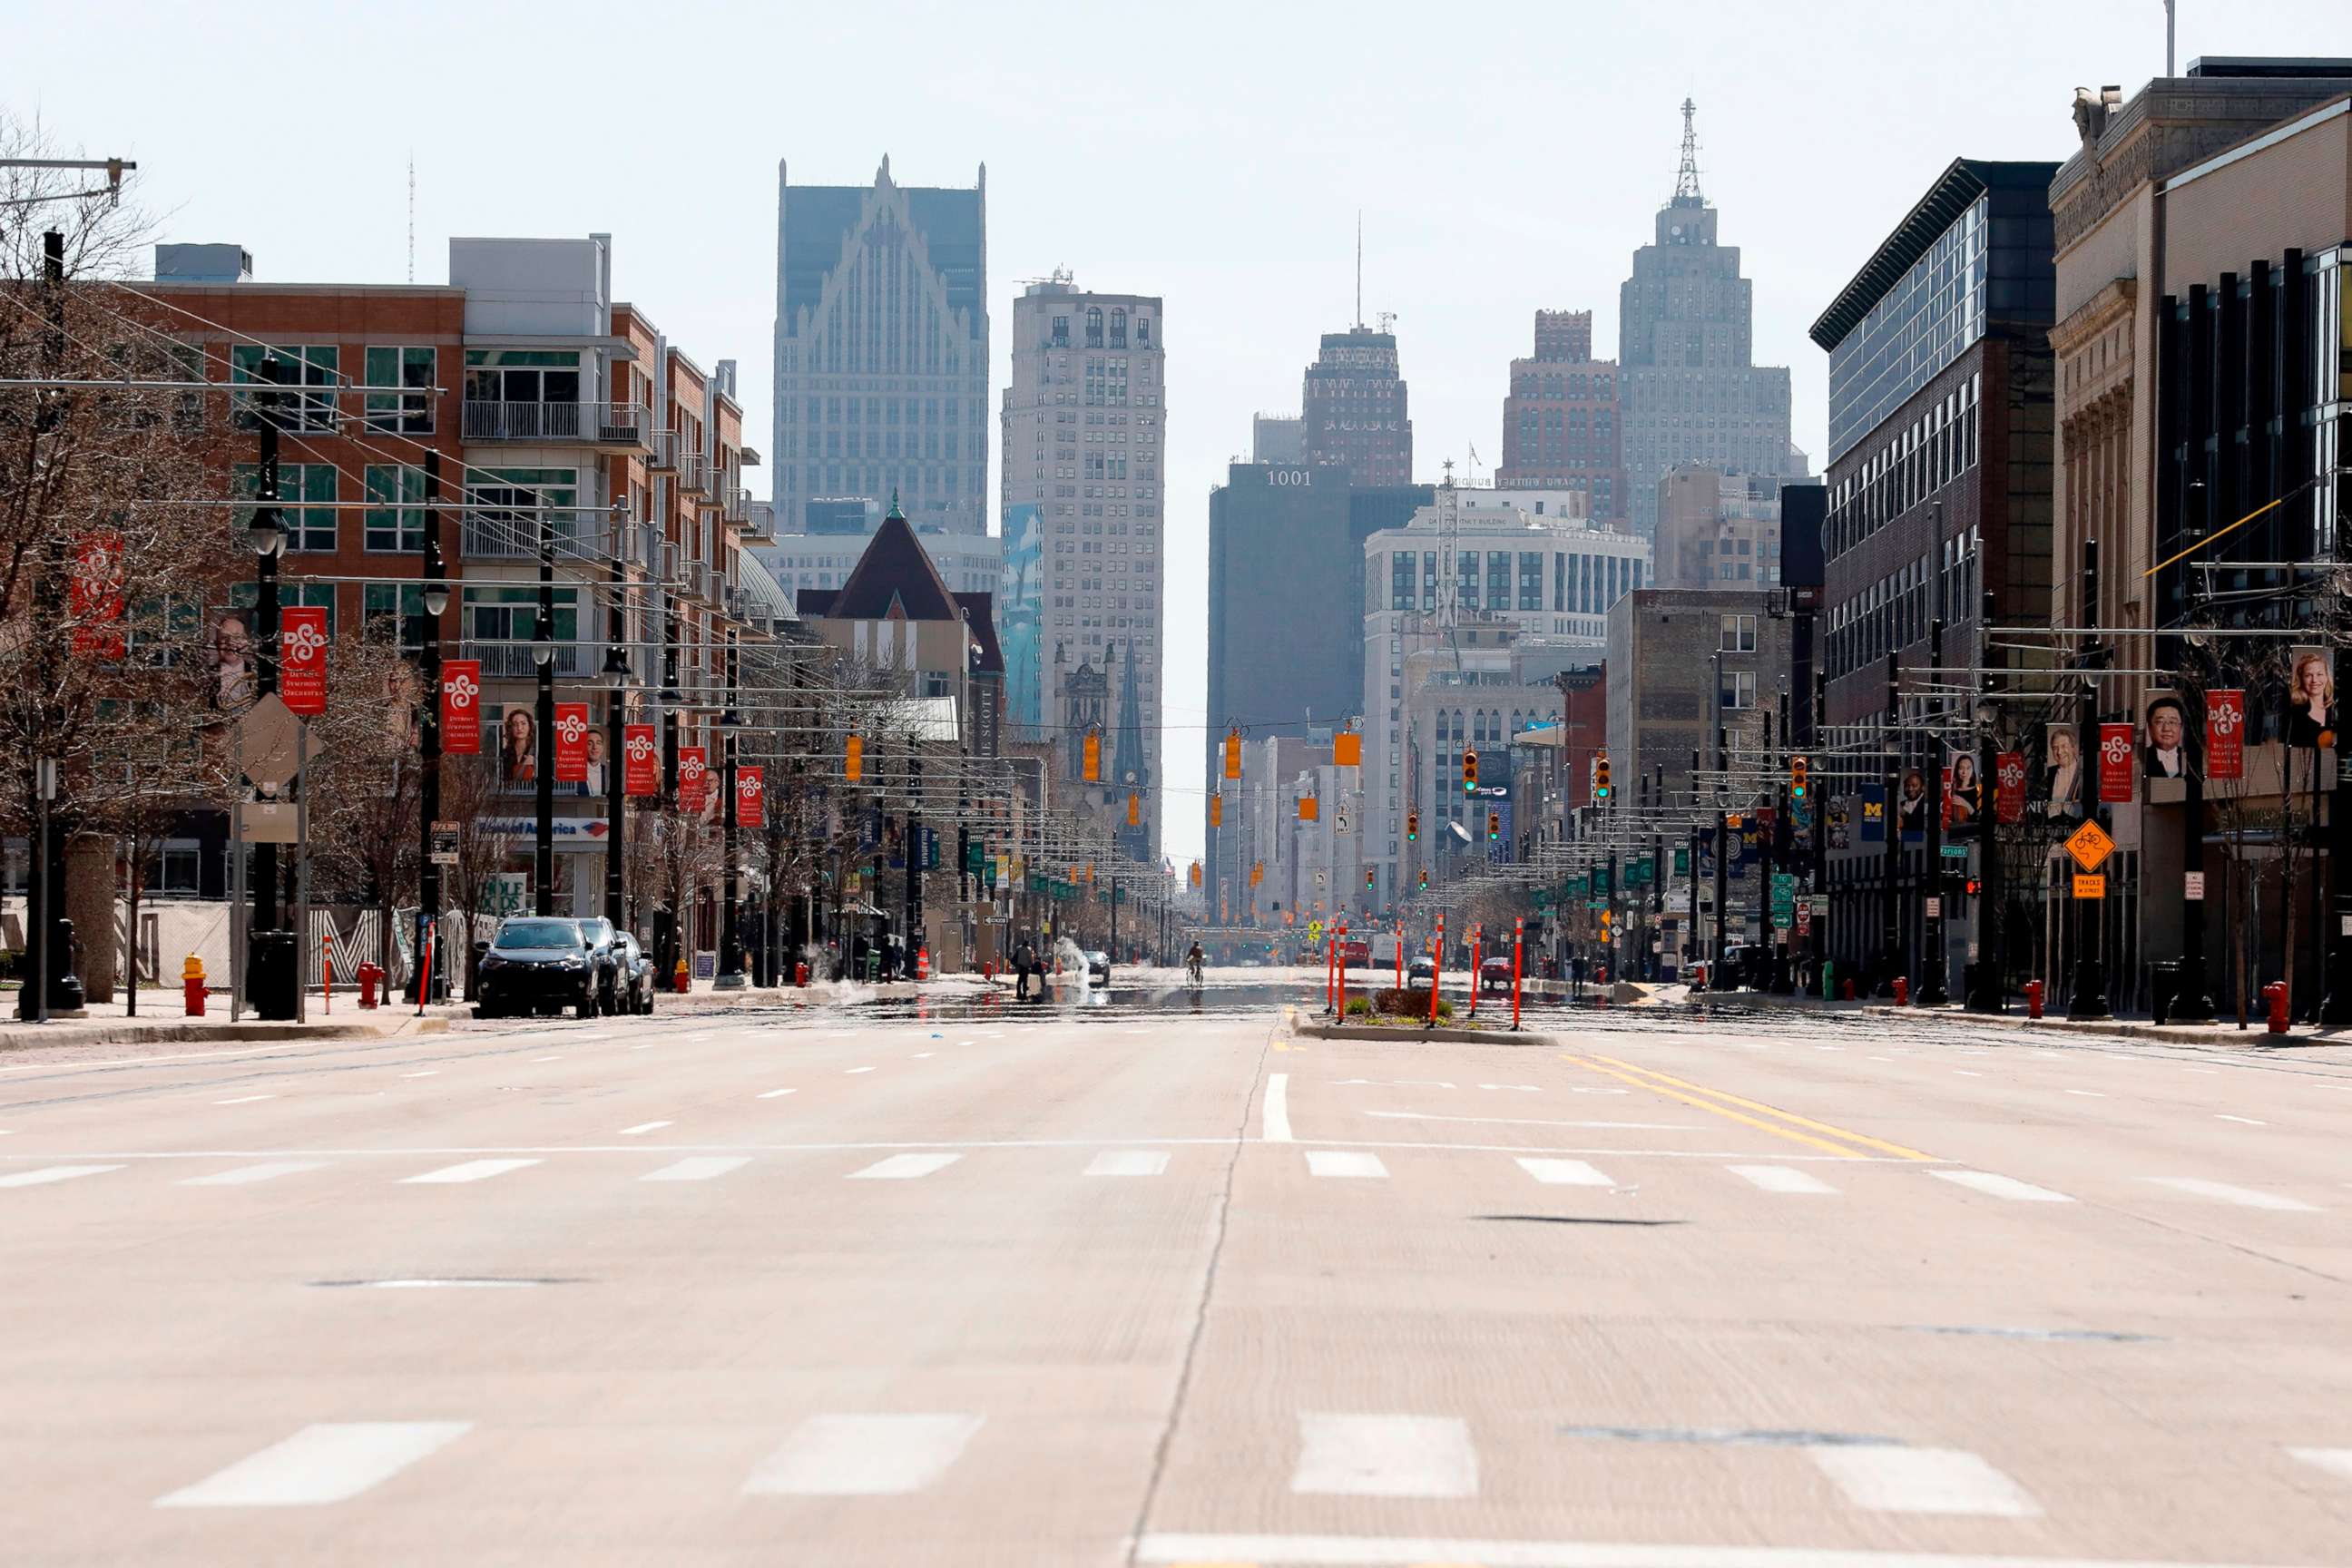 PHOTO: Woodward Avenue in downtown Detroit is desolate and quiet in the middle of the day, April 6, 2020.